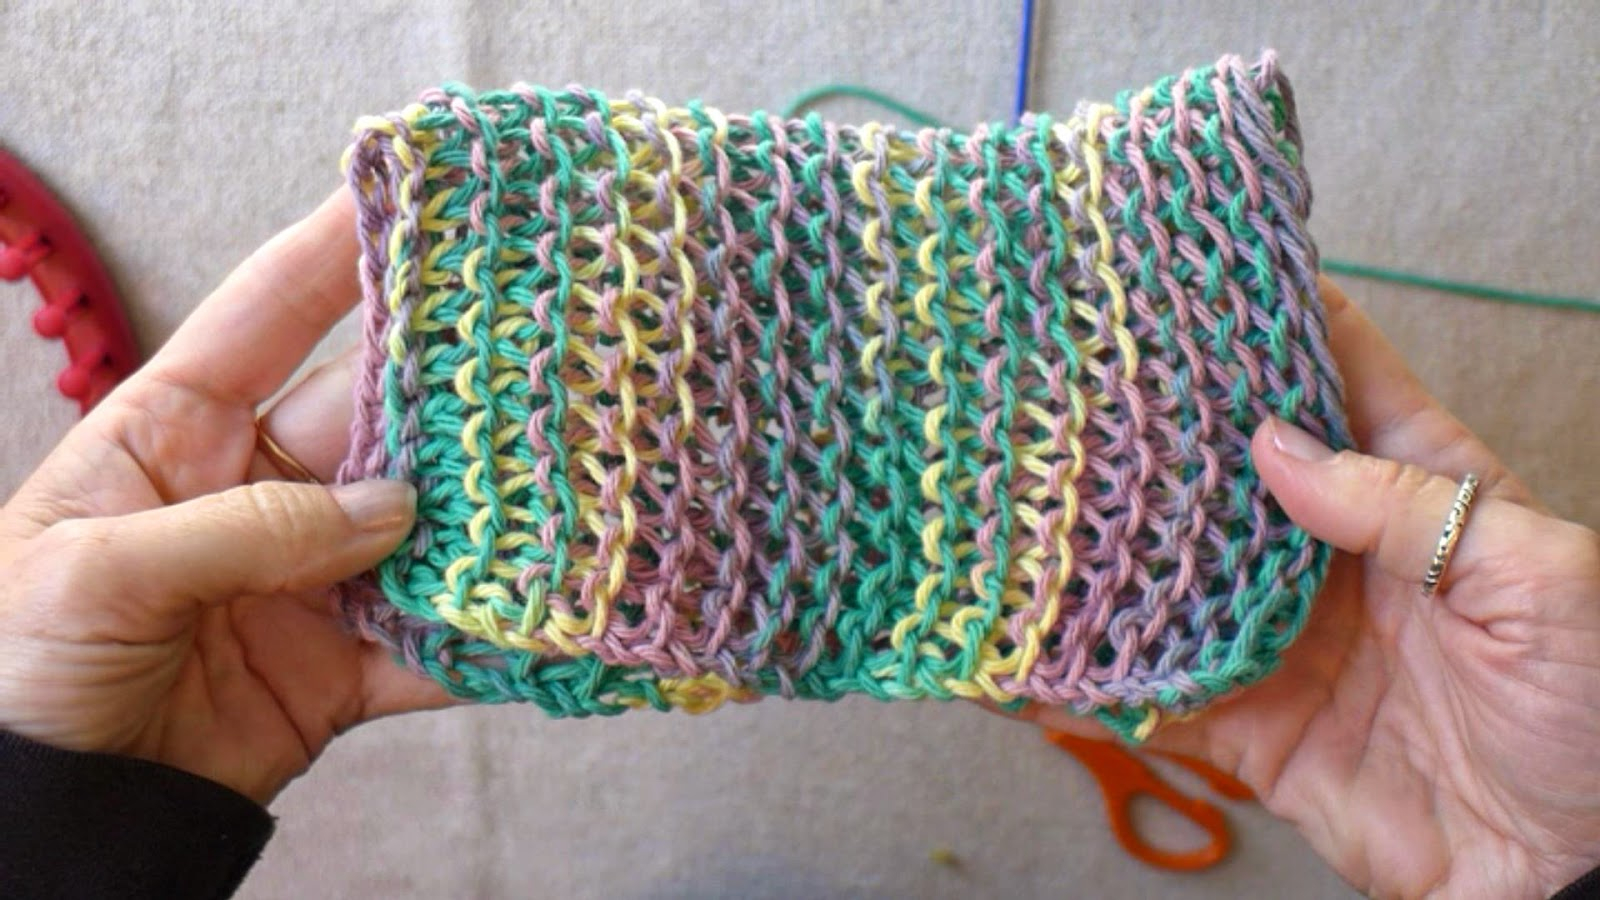 Easy Dishcloth Knit Pattern Easymeworld Learn The Basic Stitches For Loom Knitting Dish Cloths